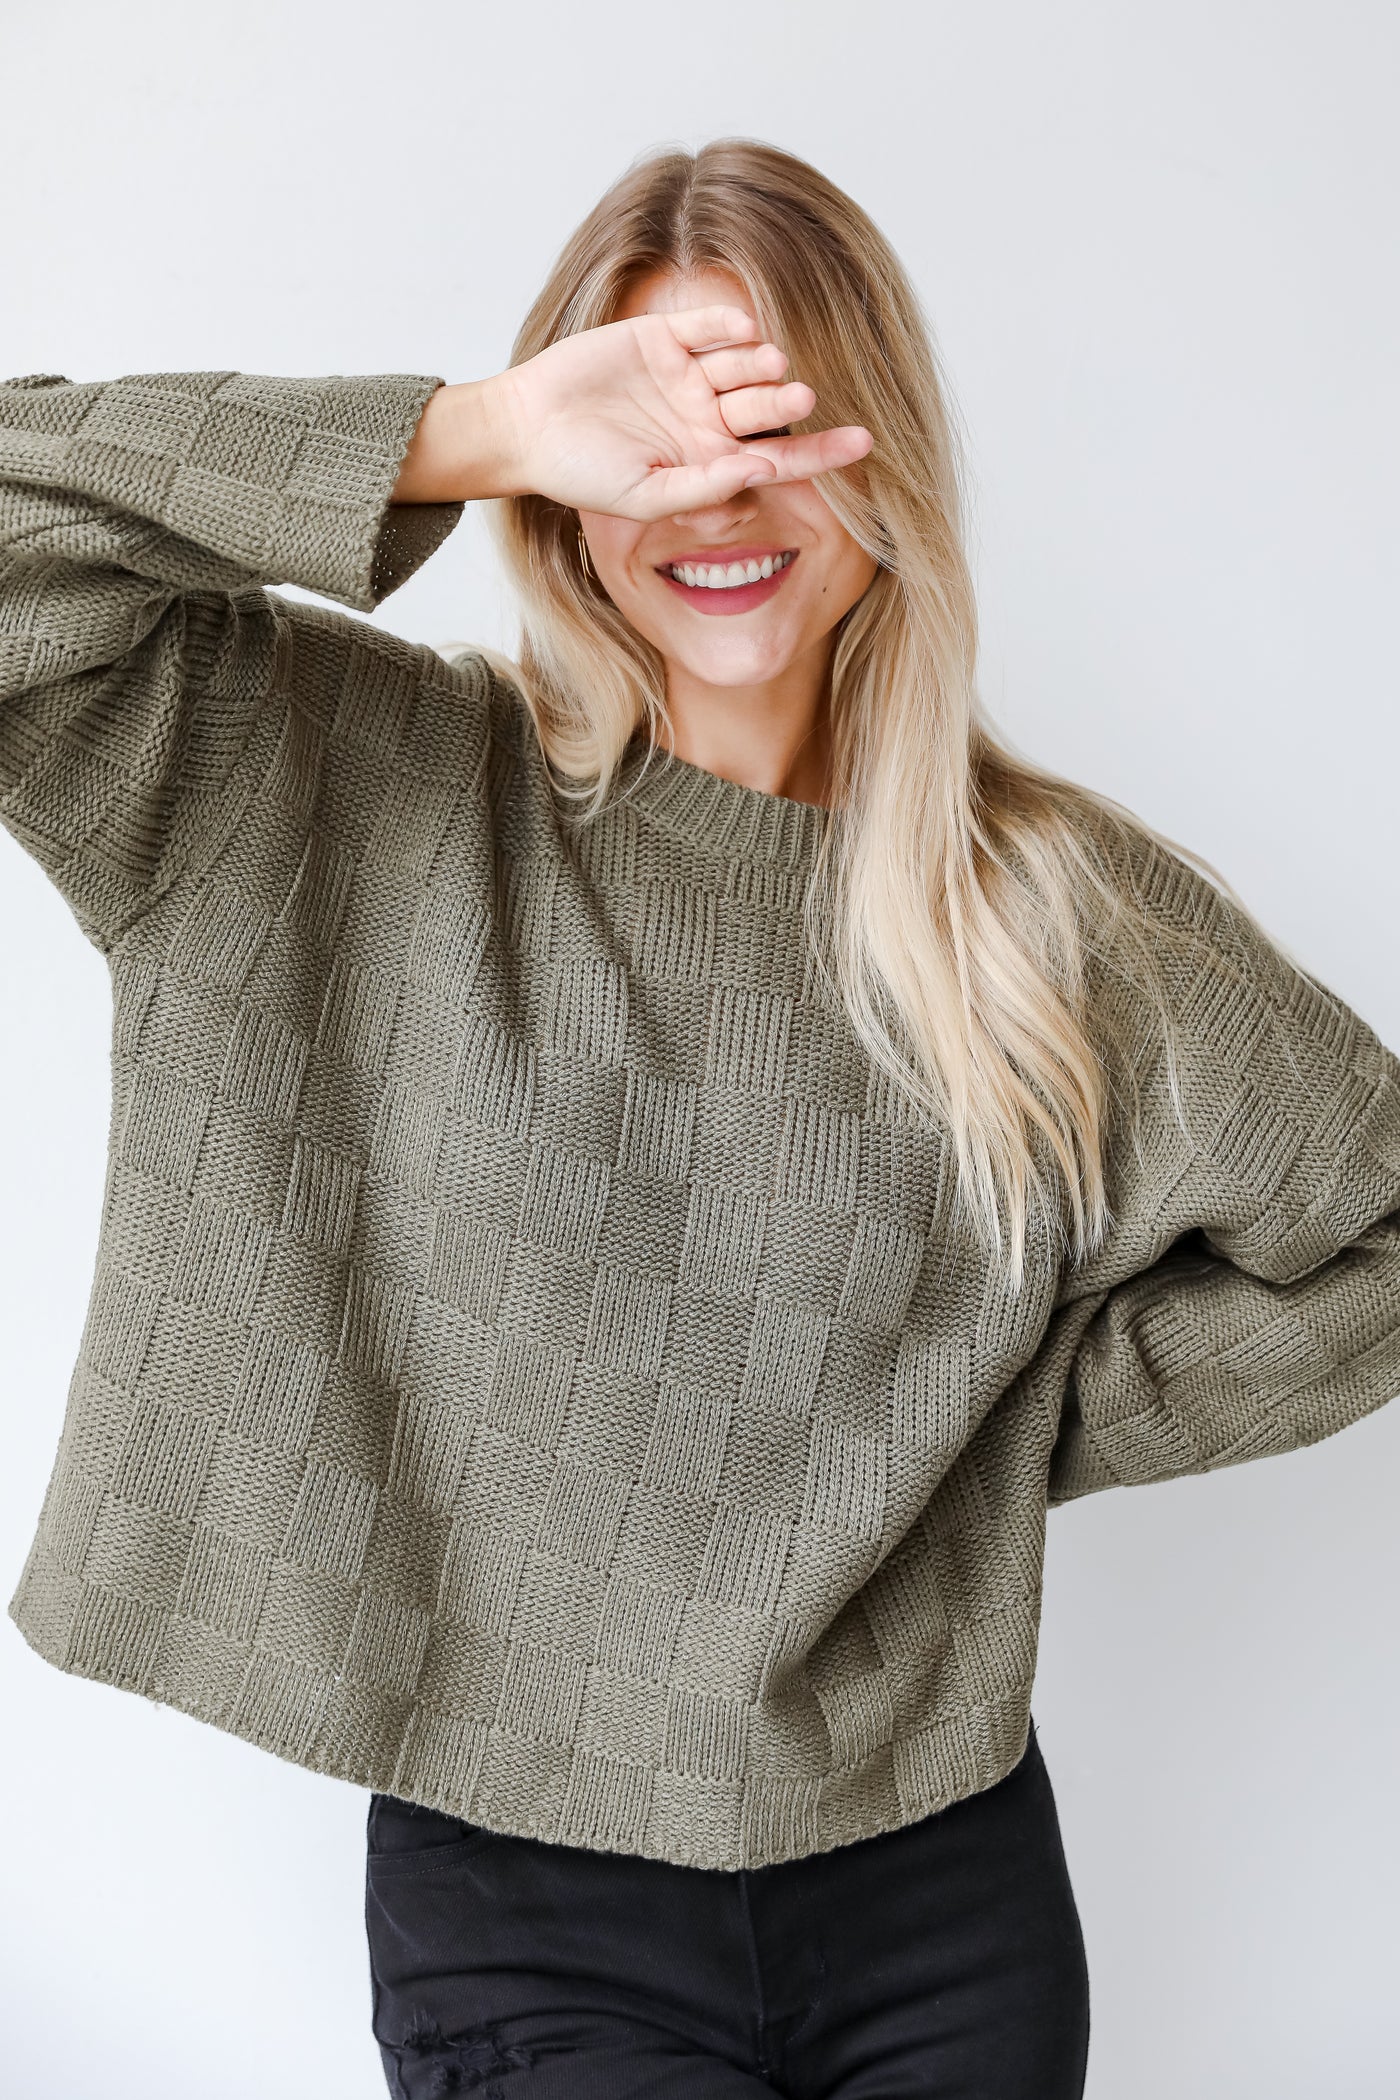 green checkered sweater on model